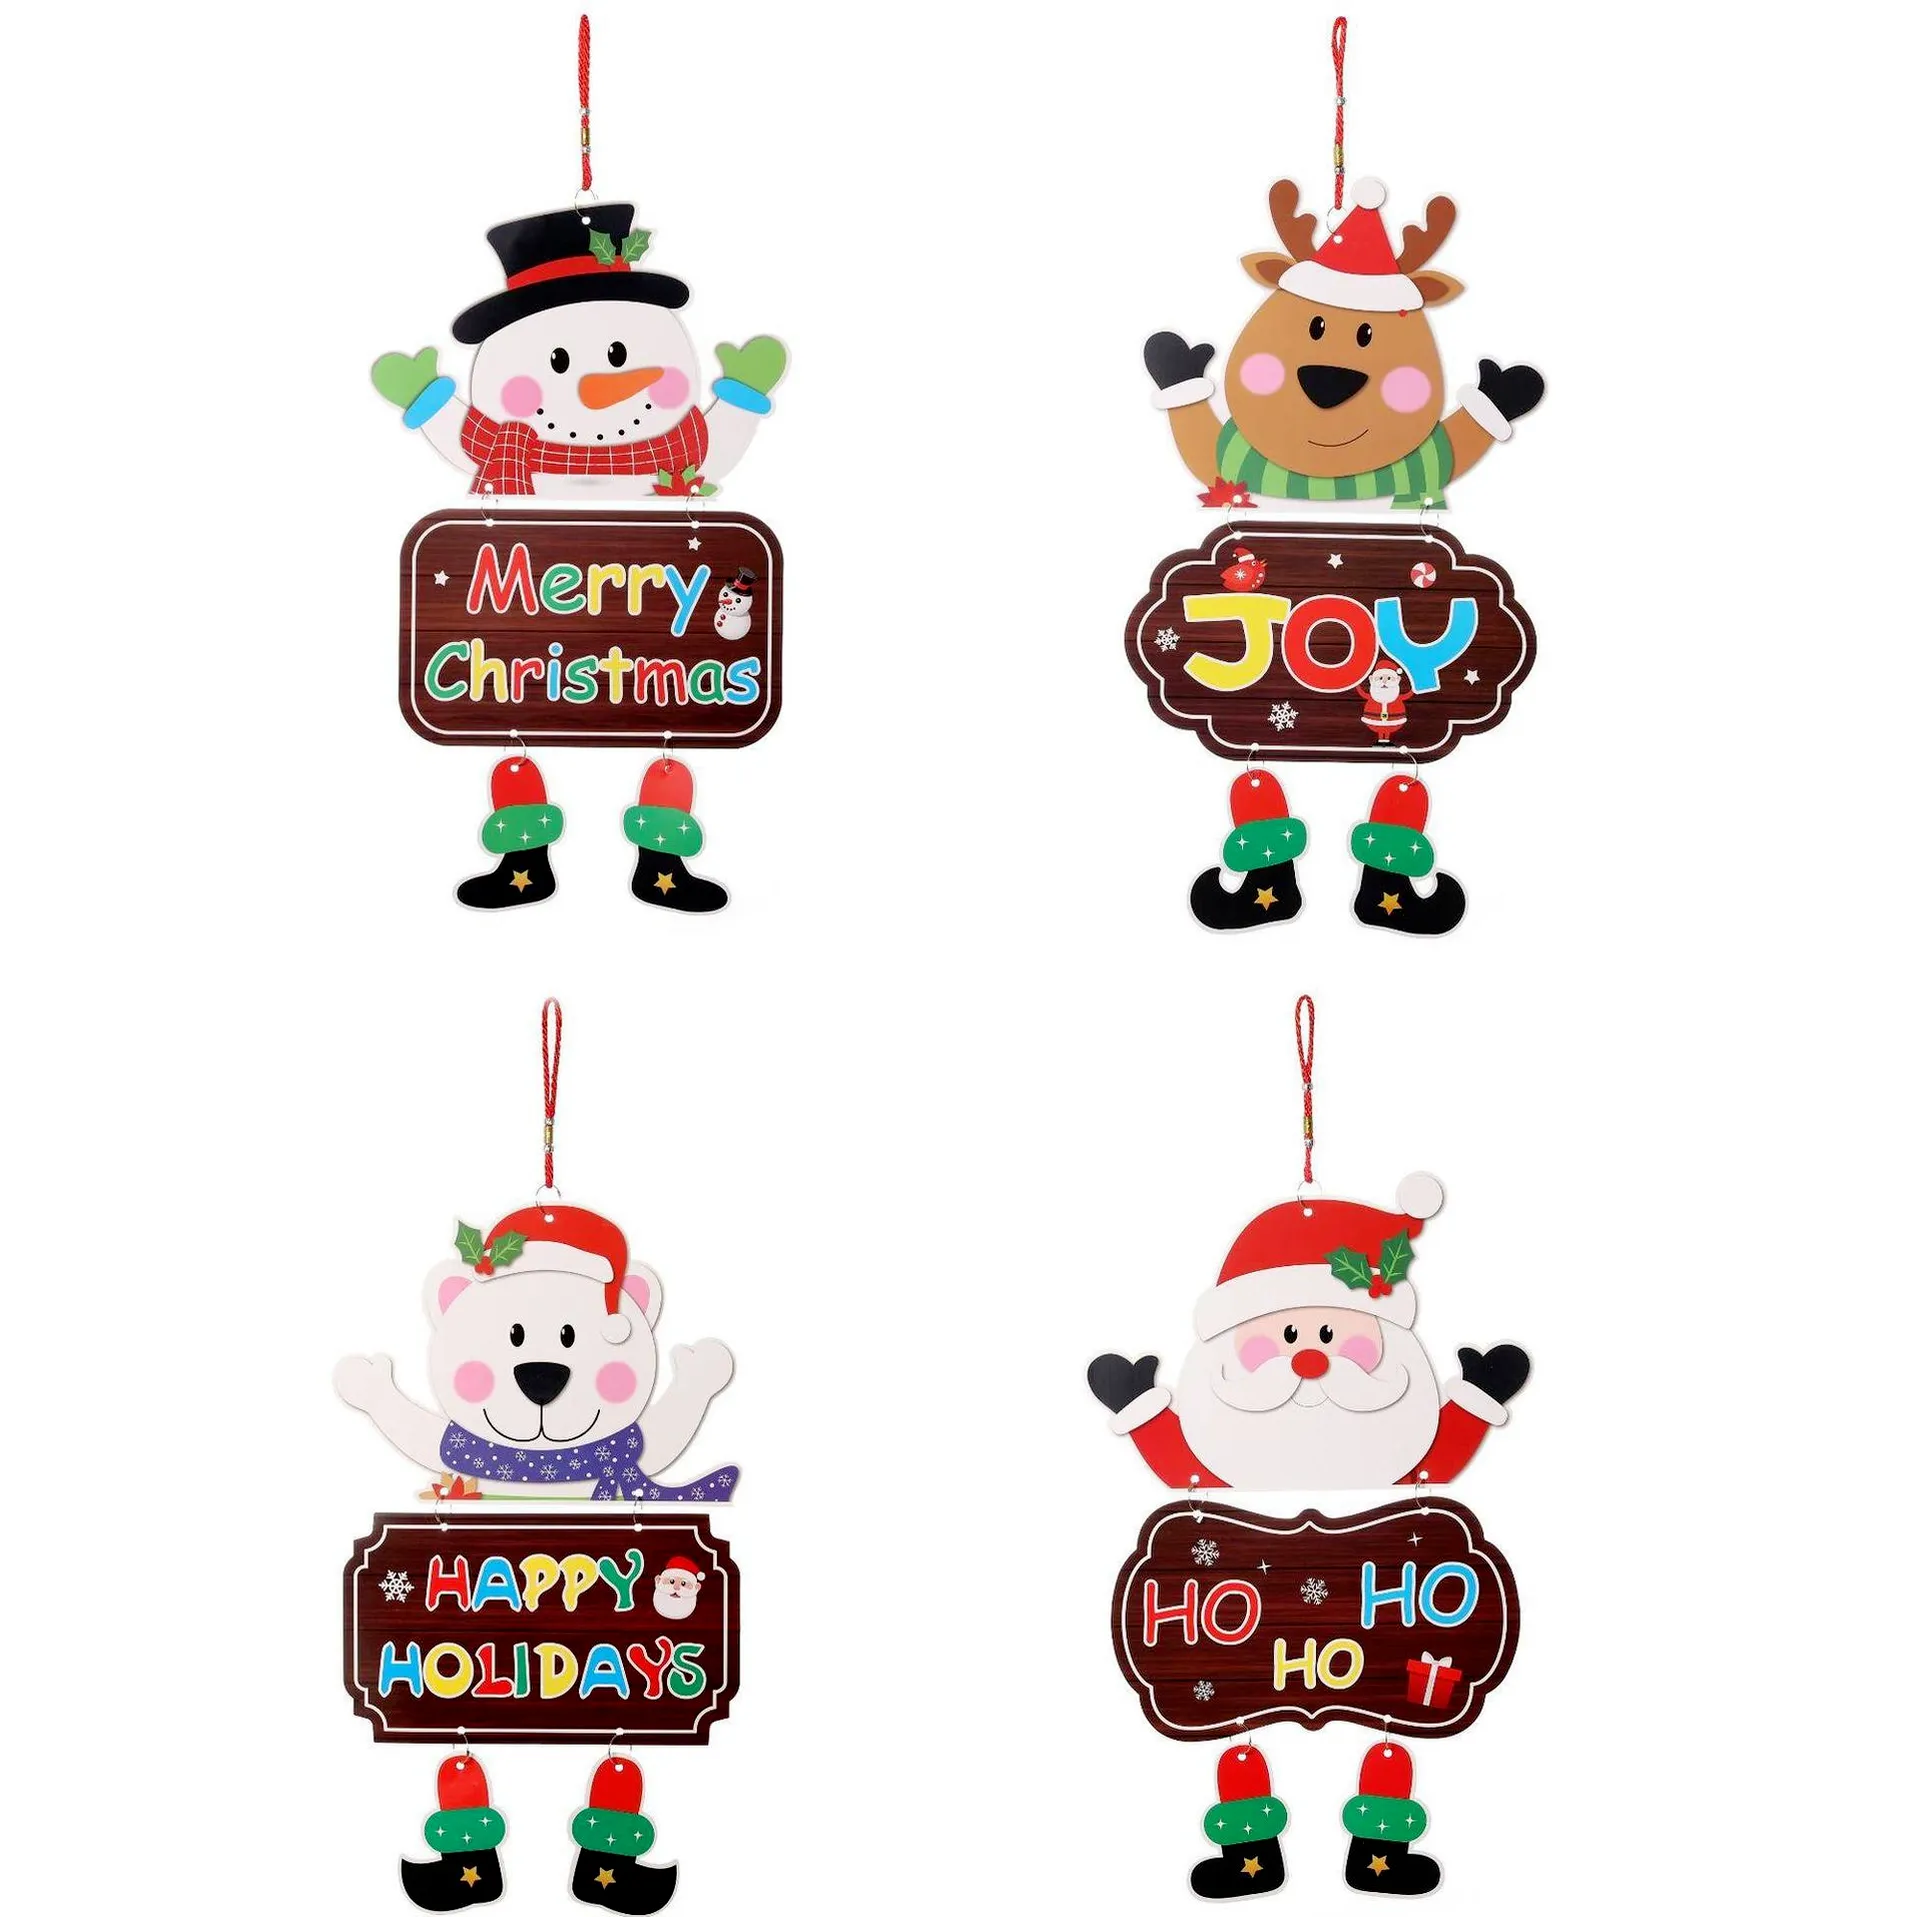 DHL Christmas Ornaments Paper Board Door Window Hanging Pendant Welcome Merry Christmas Boards Xmas Decortaions Santa Claus Snowman h496